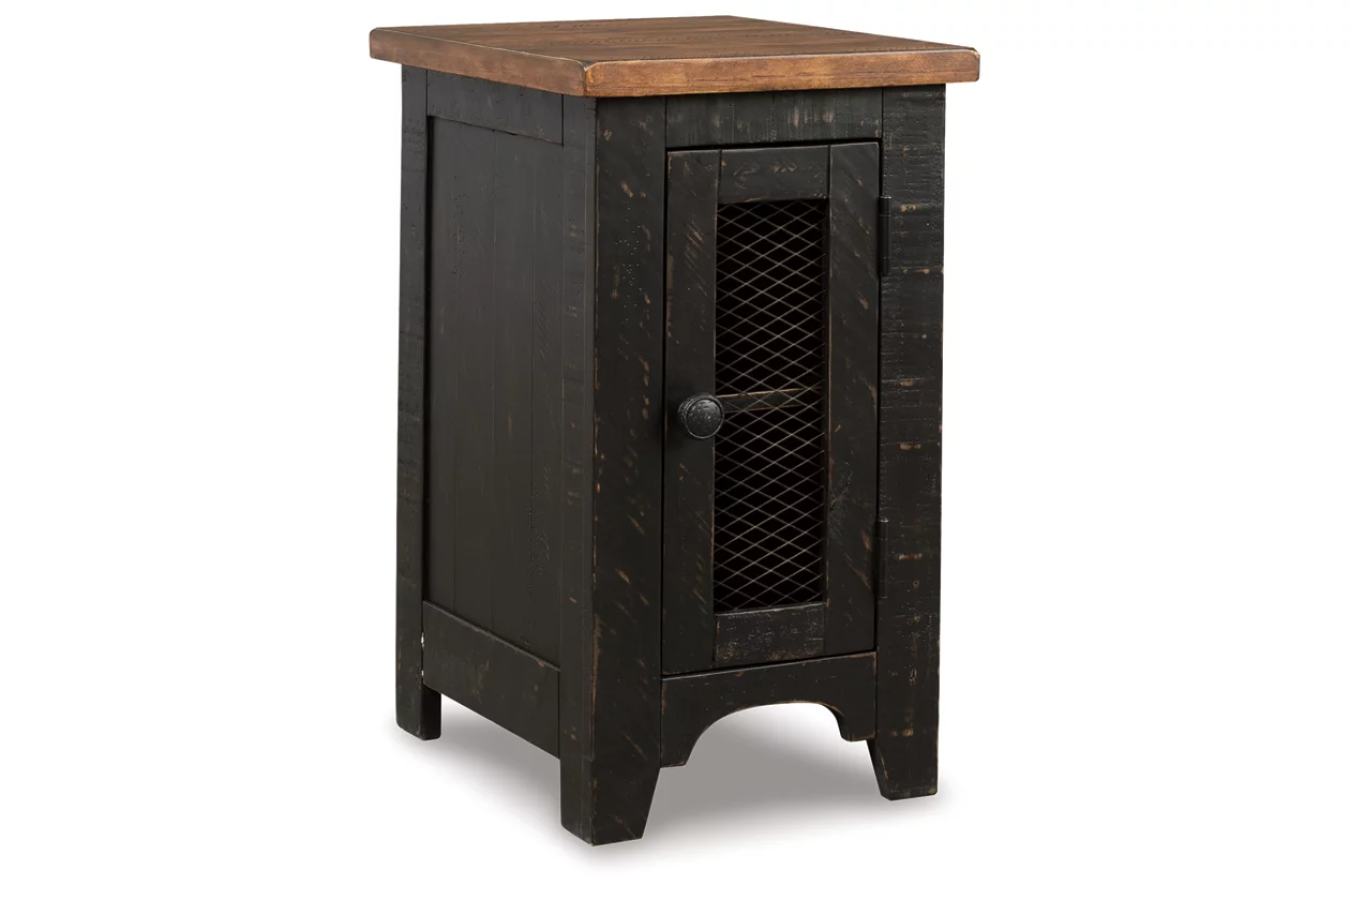 Valebeck Chairside End Table